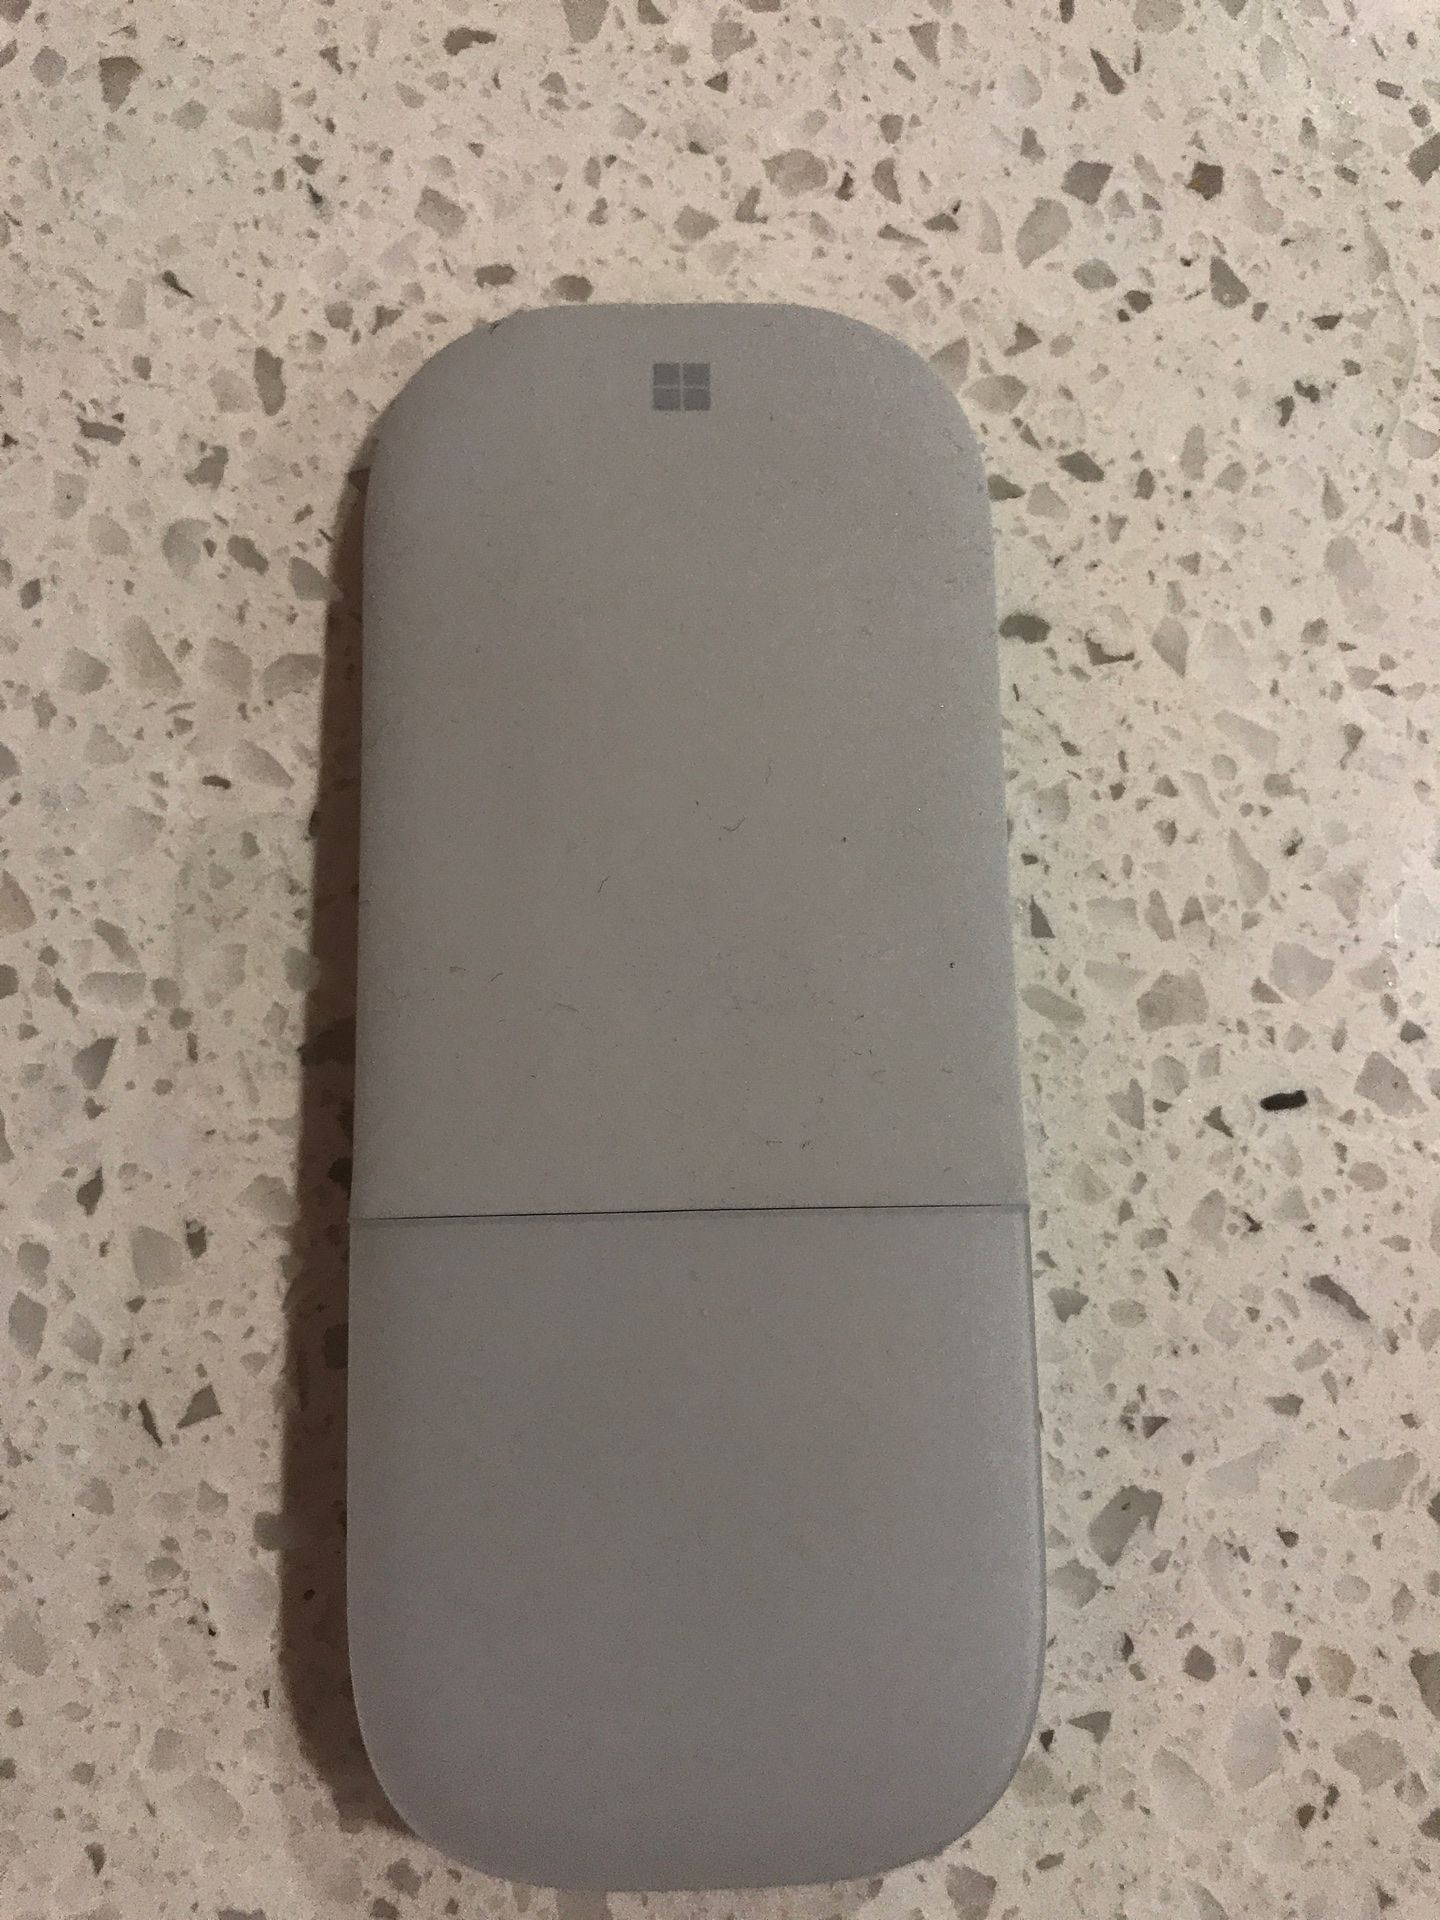 Wireless mouse with case